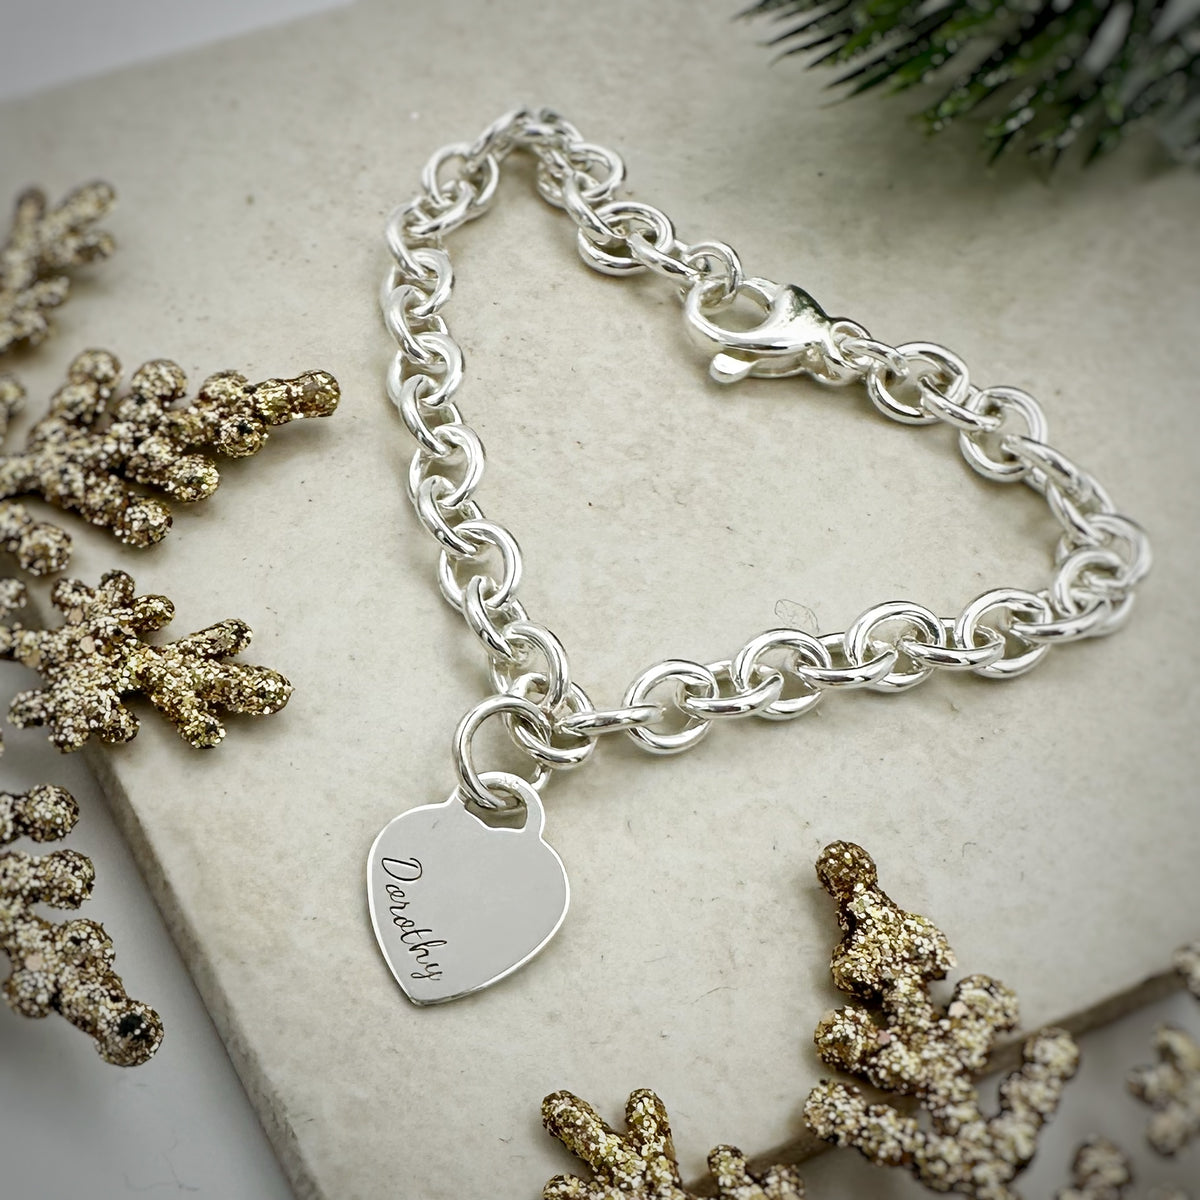 Tiny heart tag charm bracelet engraved with name